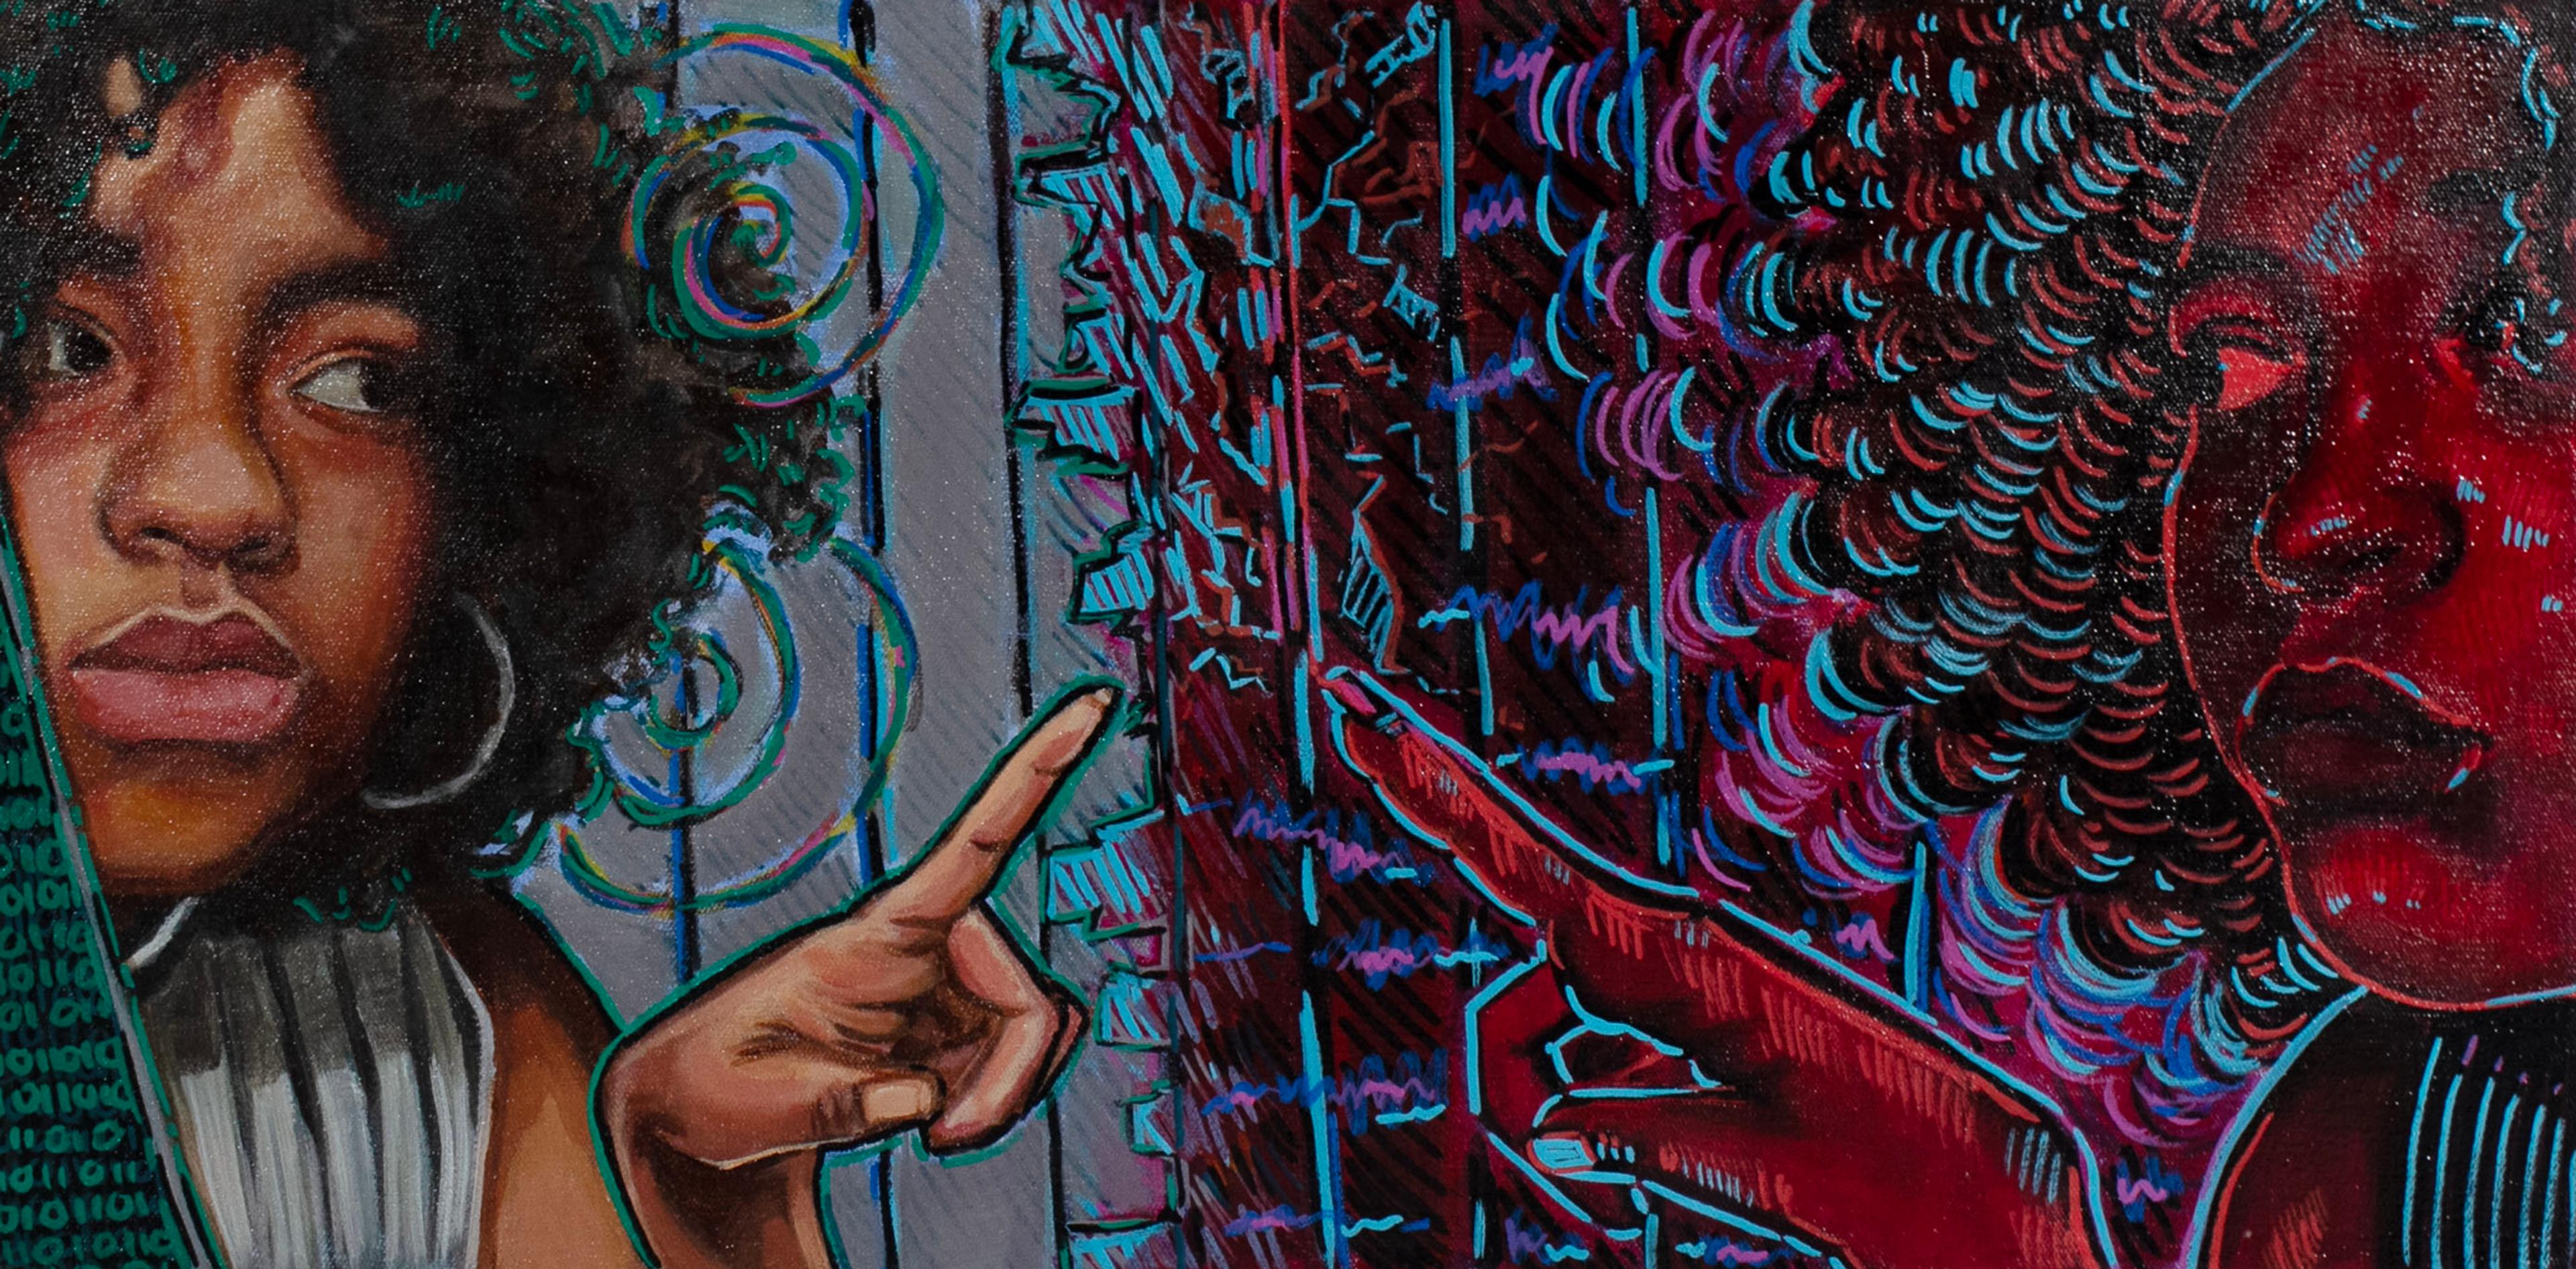 Acrylic-on-canvas painting of the head and shoulders of an adolescent Black girl with curly black hair at left, facing right and pointing her left index finger at her own mirror reflection to the right that points directly back at her. The girl's reflection is painted in fine, neon red reverse strokes on black with cyan highlights. A cast iron ornamental door guard appears behind the girl at left. At far left, a black bar extends vertically and diagonally out of the frame. The surface of the black bar is covered in tiny rows of green zeroes and ones, suggesting binary computer code.